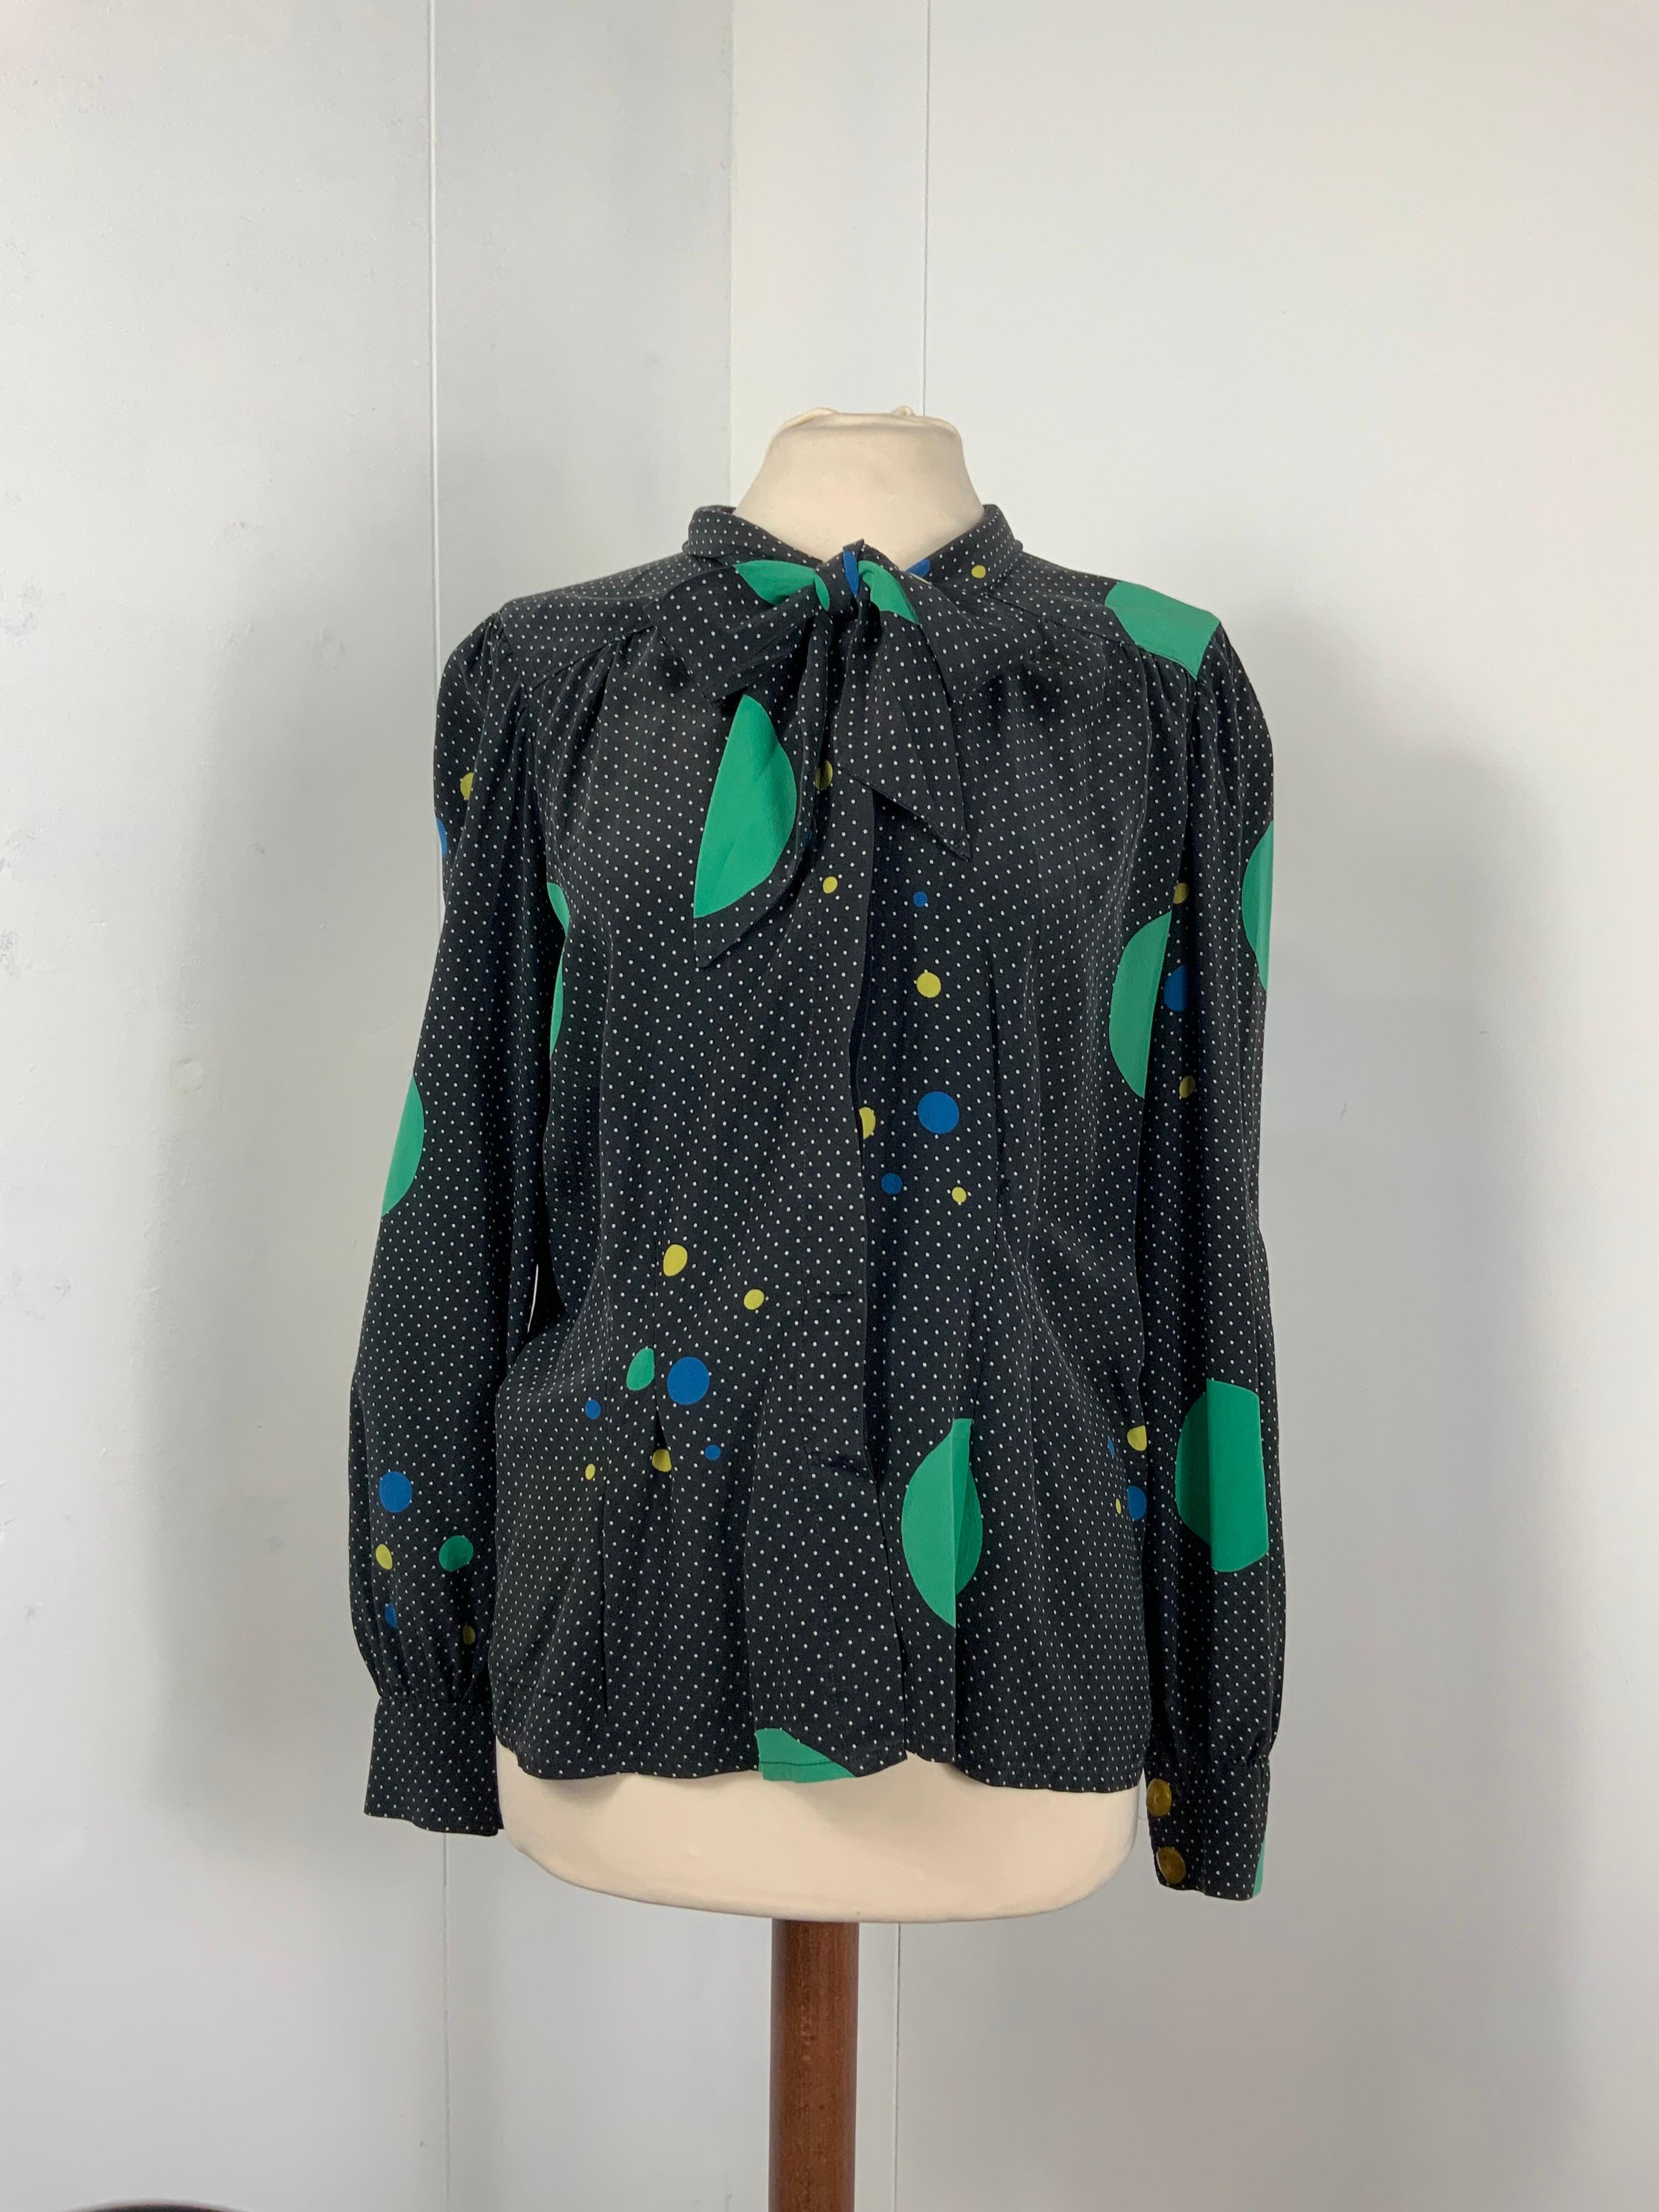 Yves Saint Laurent vintage bluse.
Rive gauche.
100% silk. Pois pattern.
Size 40.
Measurements:
Shoulders 40 cm
Bust 50 cm
Length 66 cm
Sleeves 64 cm
Conditions: very good- Previously owned and gently worn, with little signs of use. It shows a little